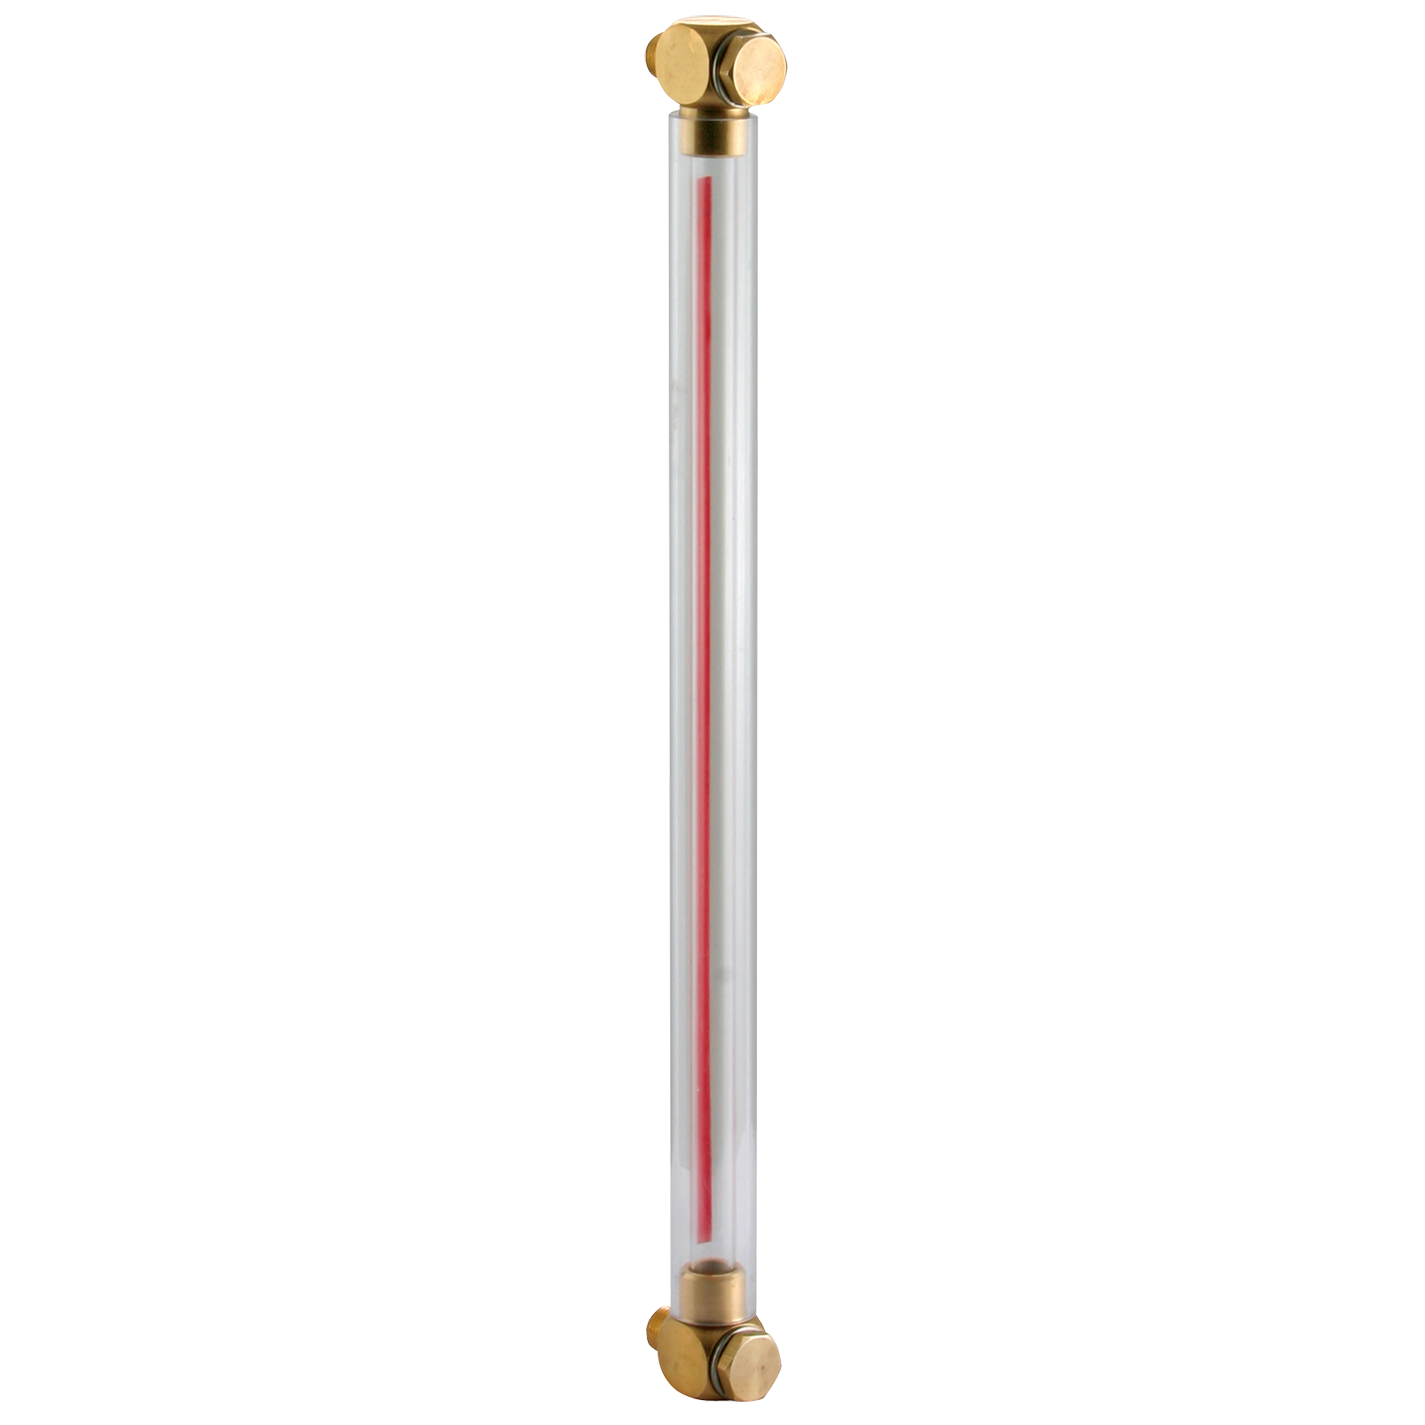 1/2" BSP Fluid Level Gauge W/O Thermometer Centres 800mm